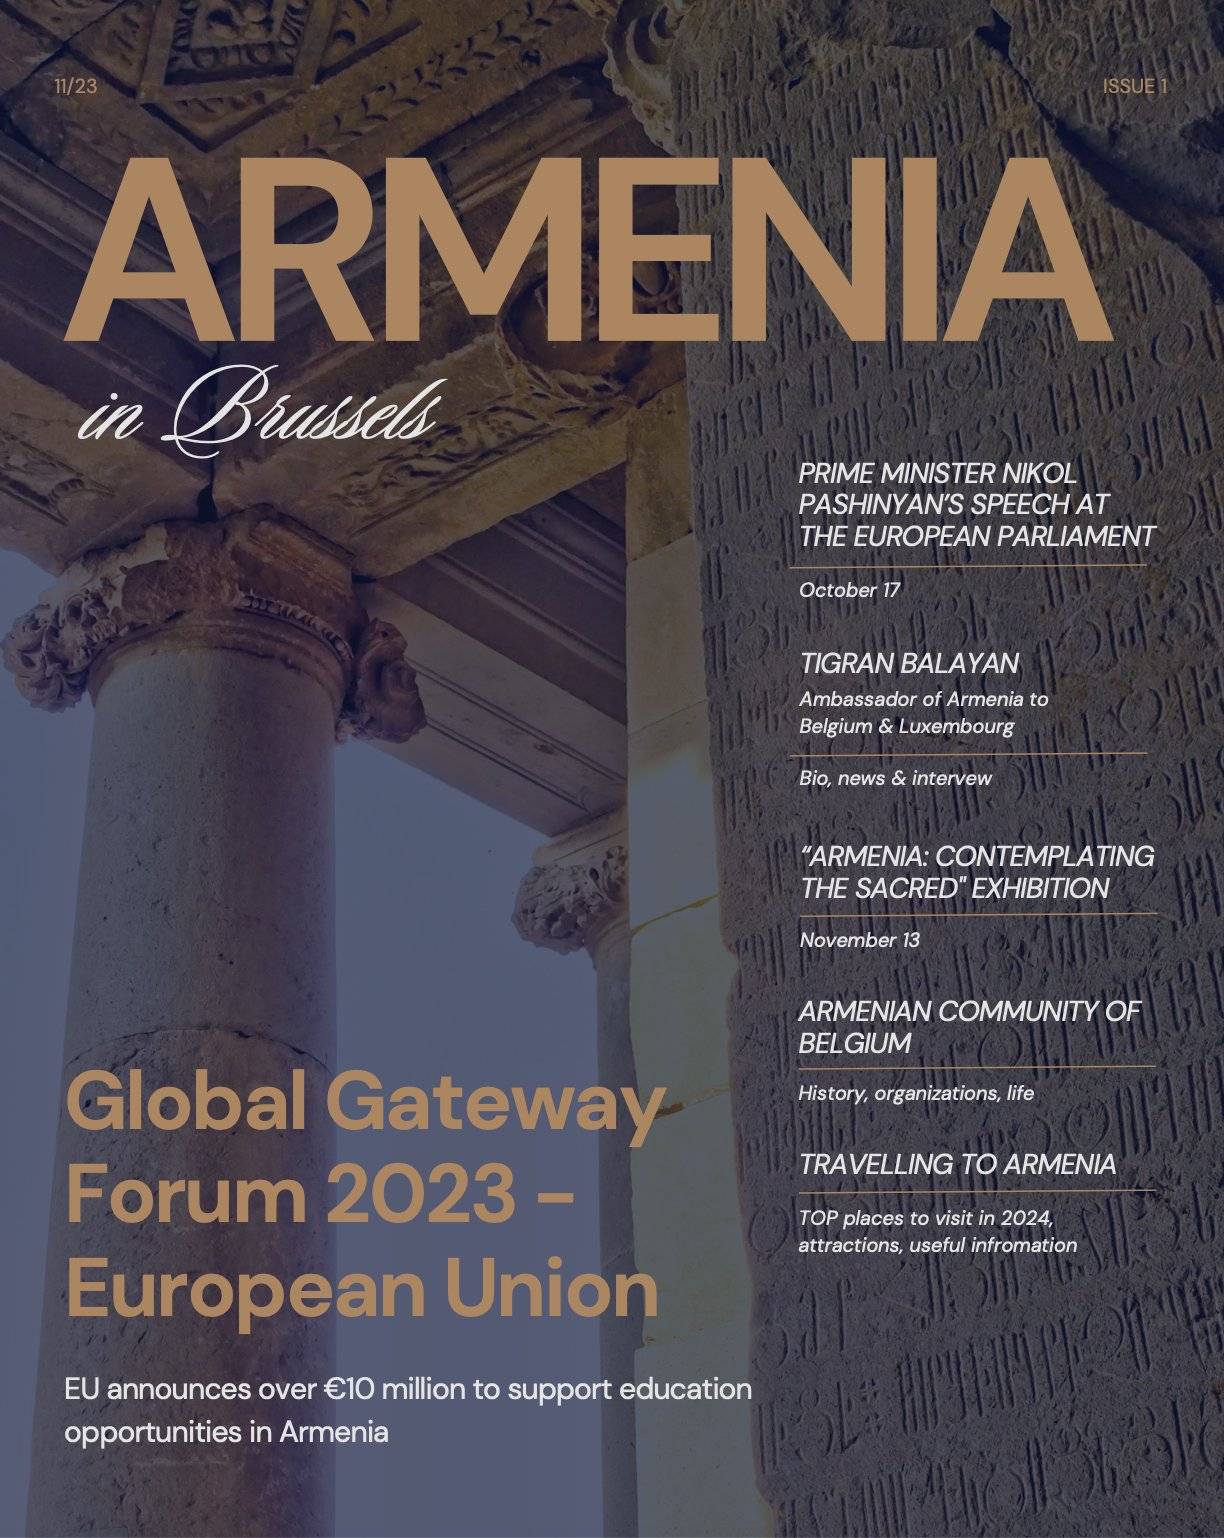 "Armenia in Brussels" Monthly Newsletter, a new project by the Embassy of Armenia